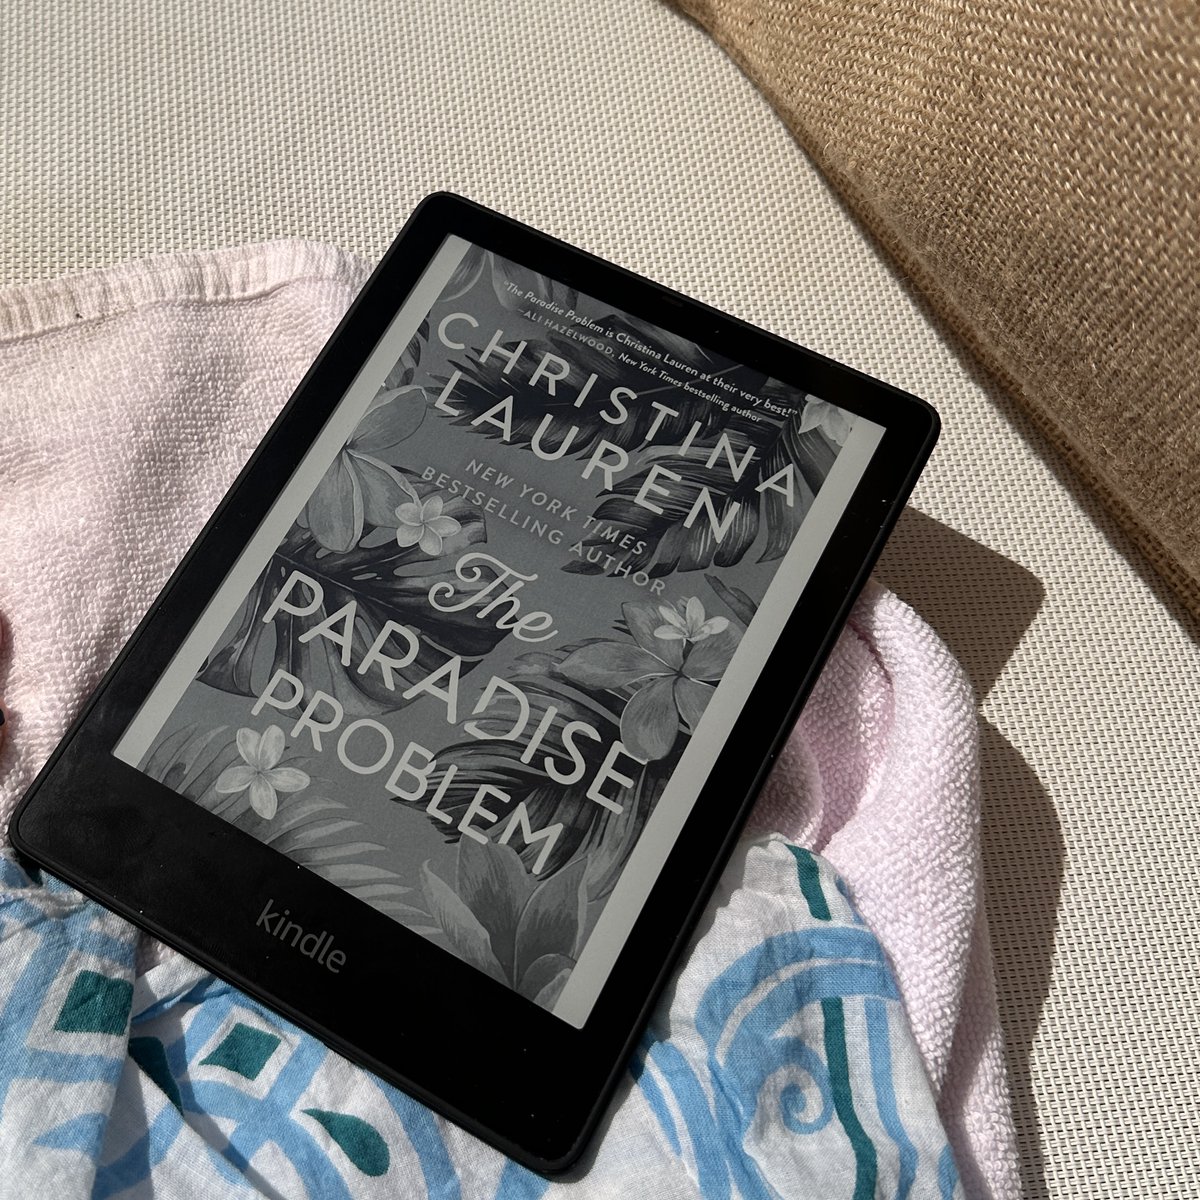 If you love the fake dating trope and loved the show Succession, this is the book for you. #theparadiseproblem #christinalauren #romcombooks #fakedatingtrope